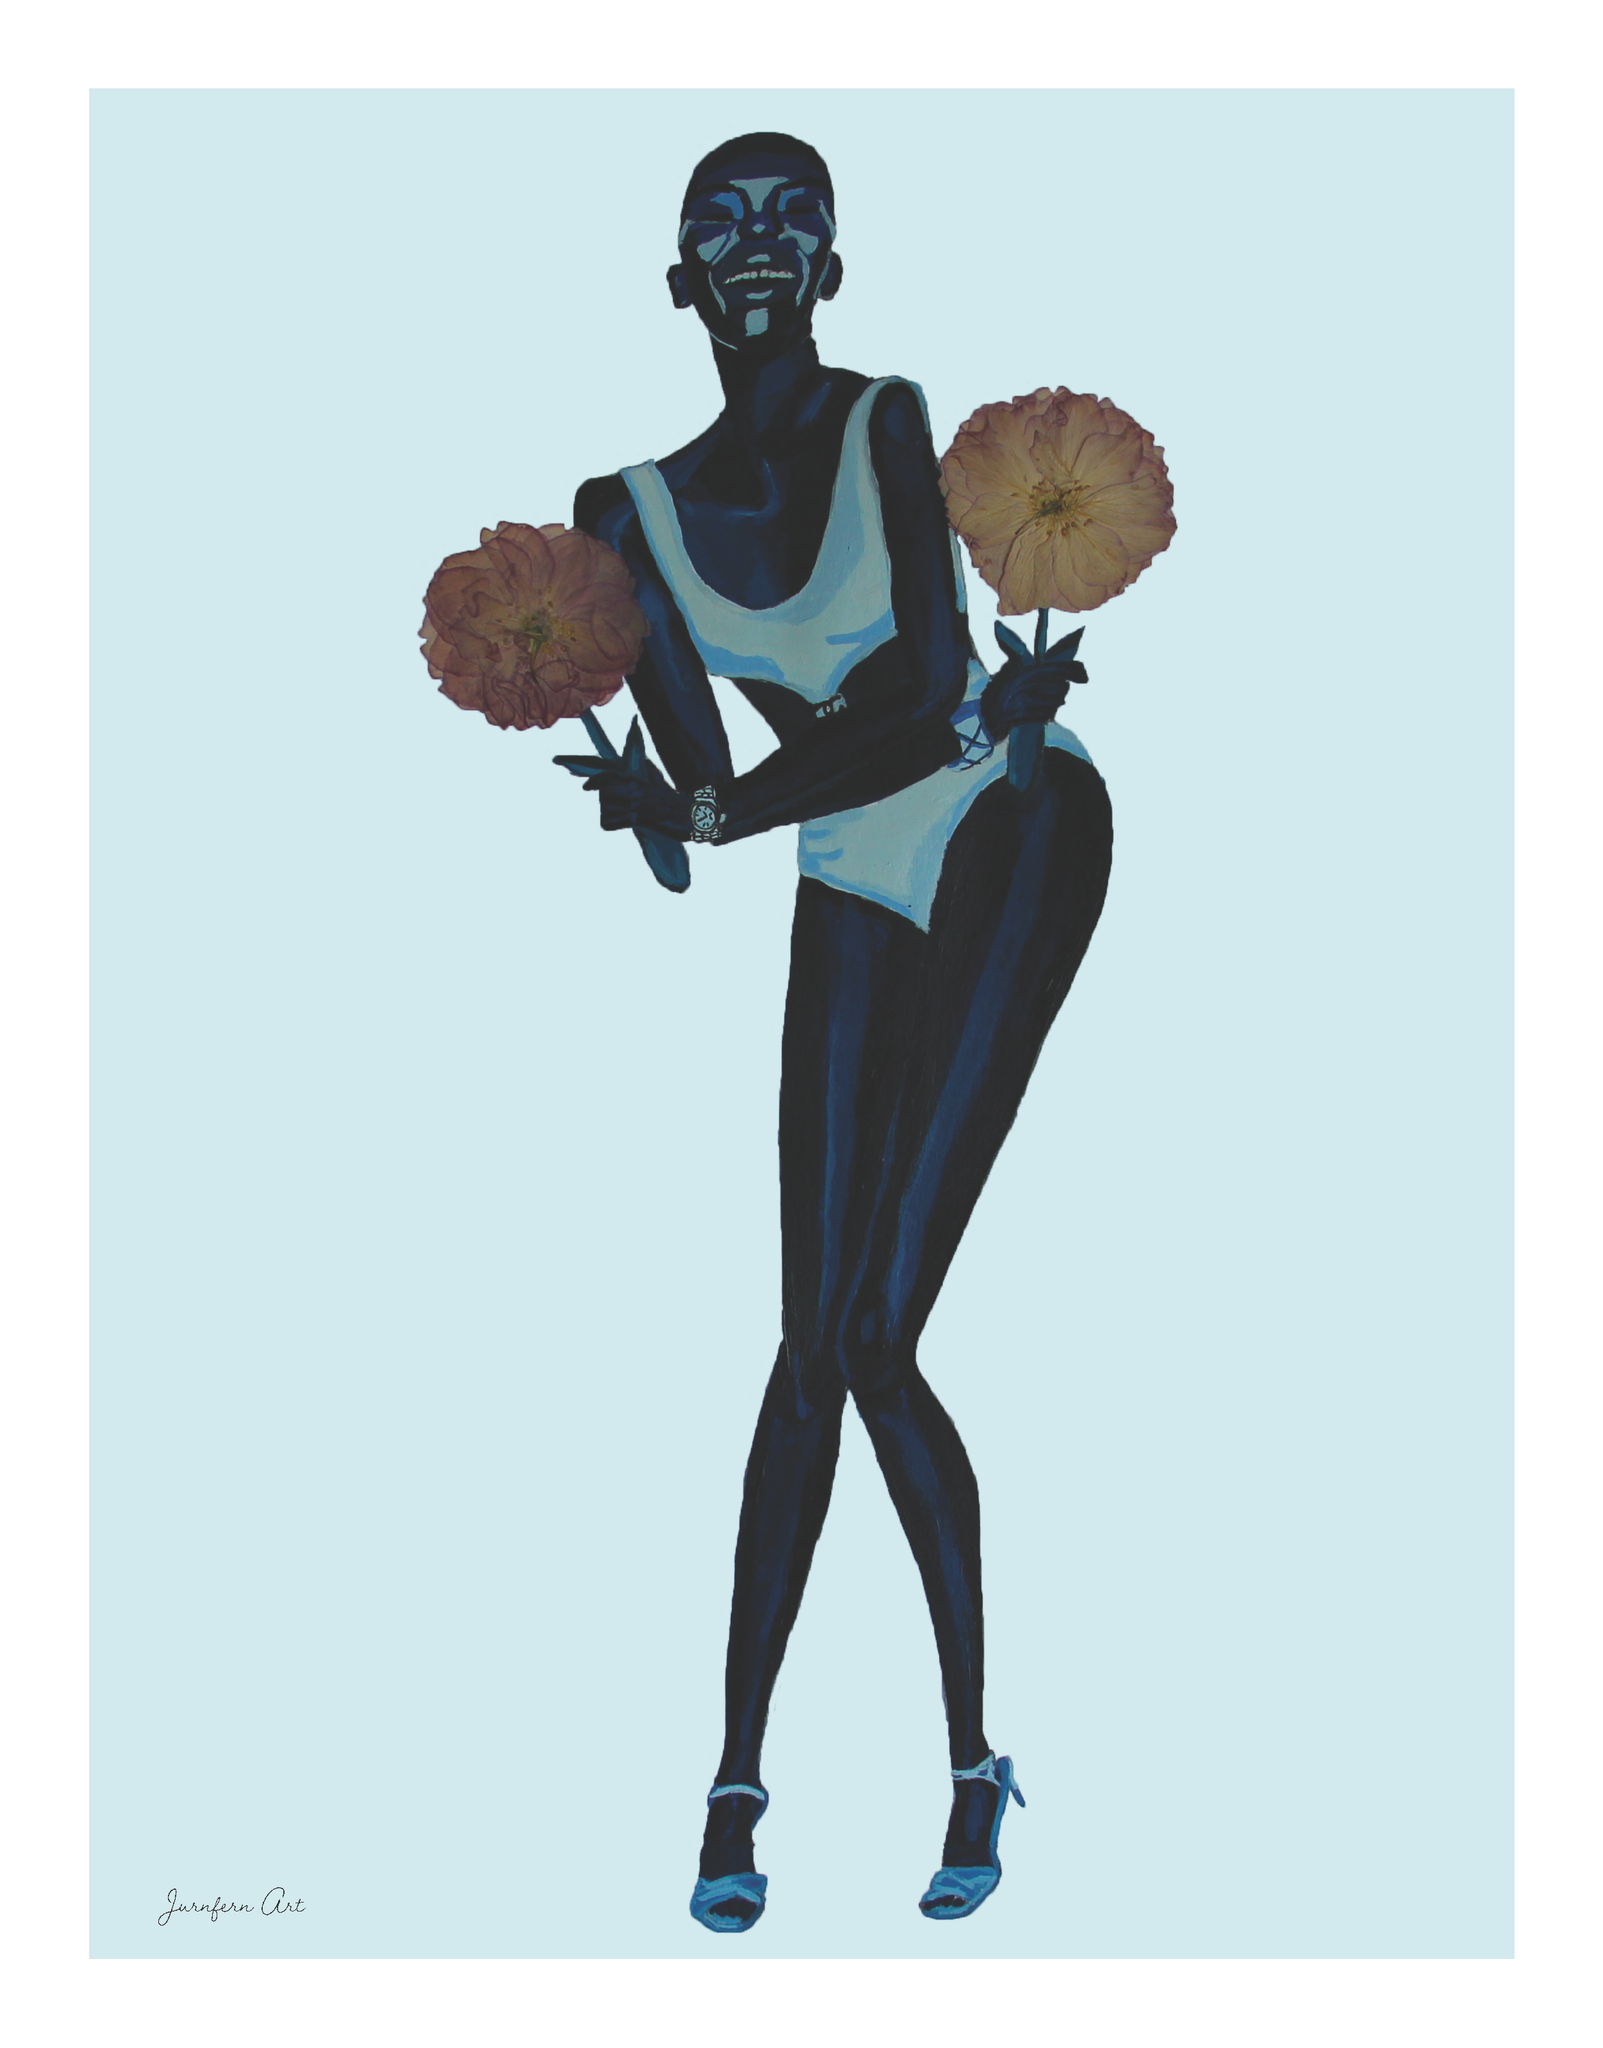 8.5 by 11 inch Black fashion illustration print of a painting of model Adut Akech modeling a Chanel swimsuit and holding pink pressed flowers with a light blue background